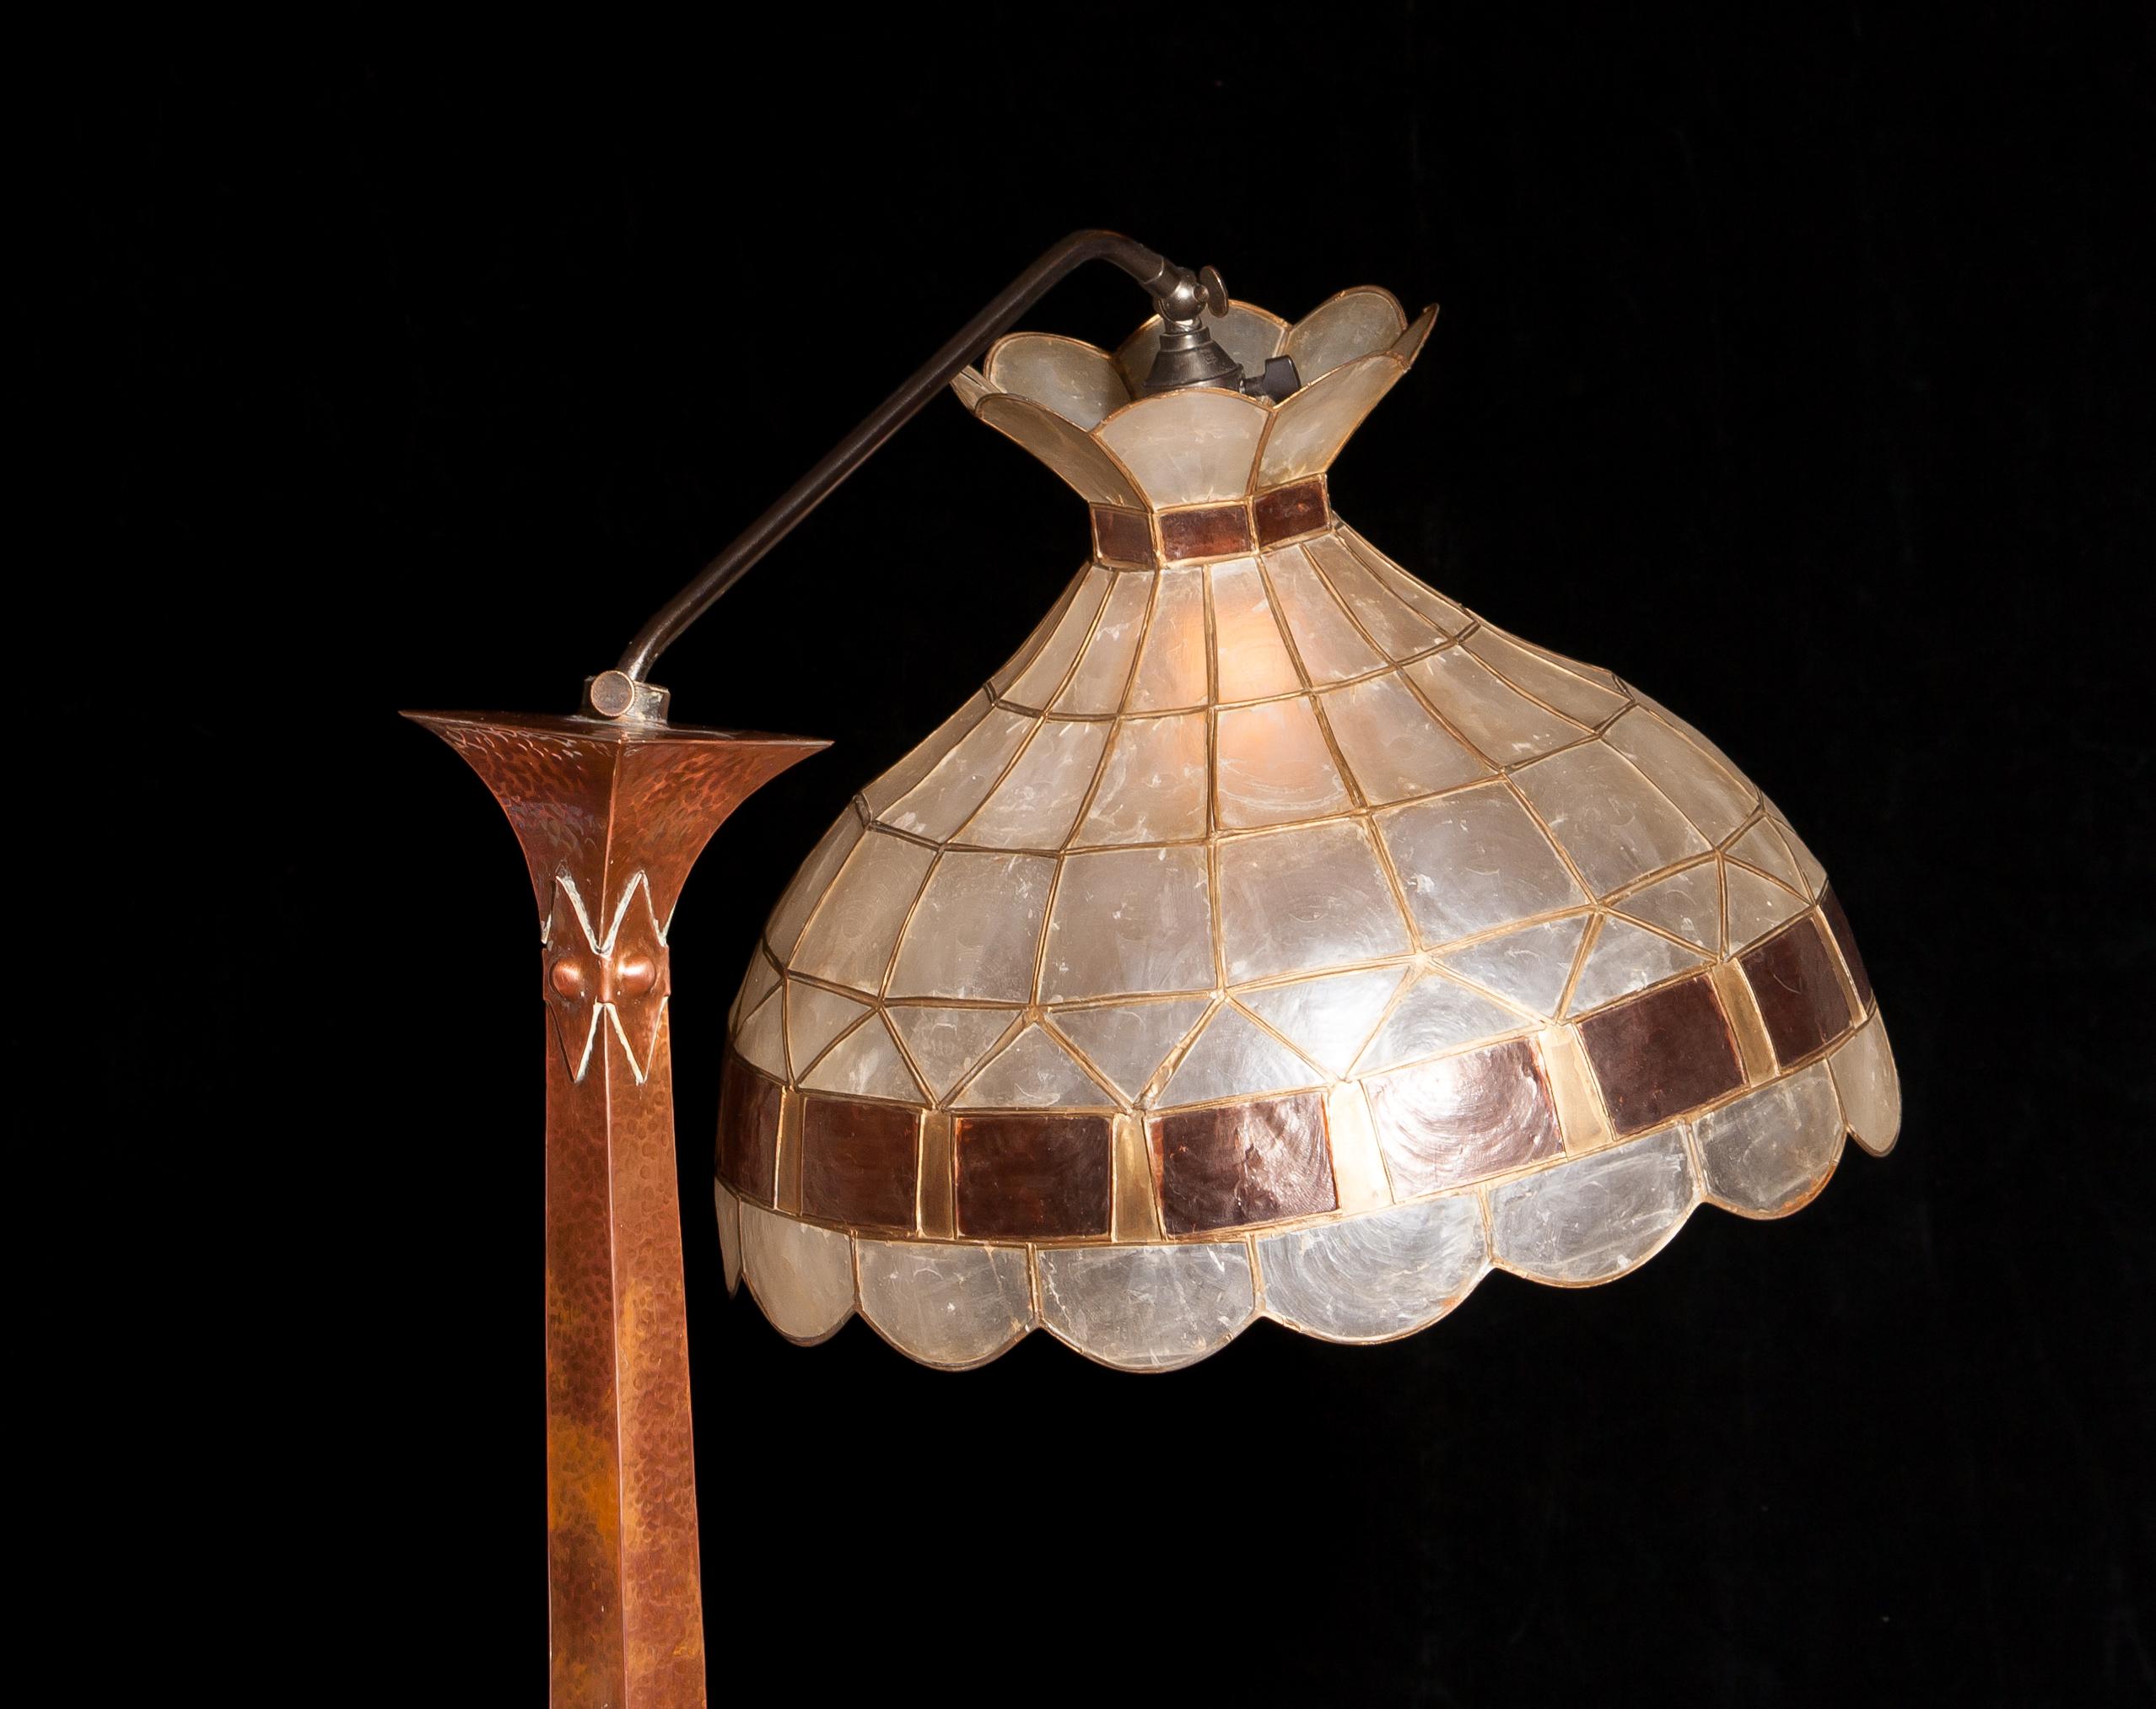 Swedish 1930s, Hand-Hammered Red Copper and Tiffani Style Art Deco Floor Lamp, Sweden